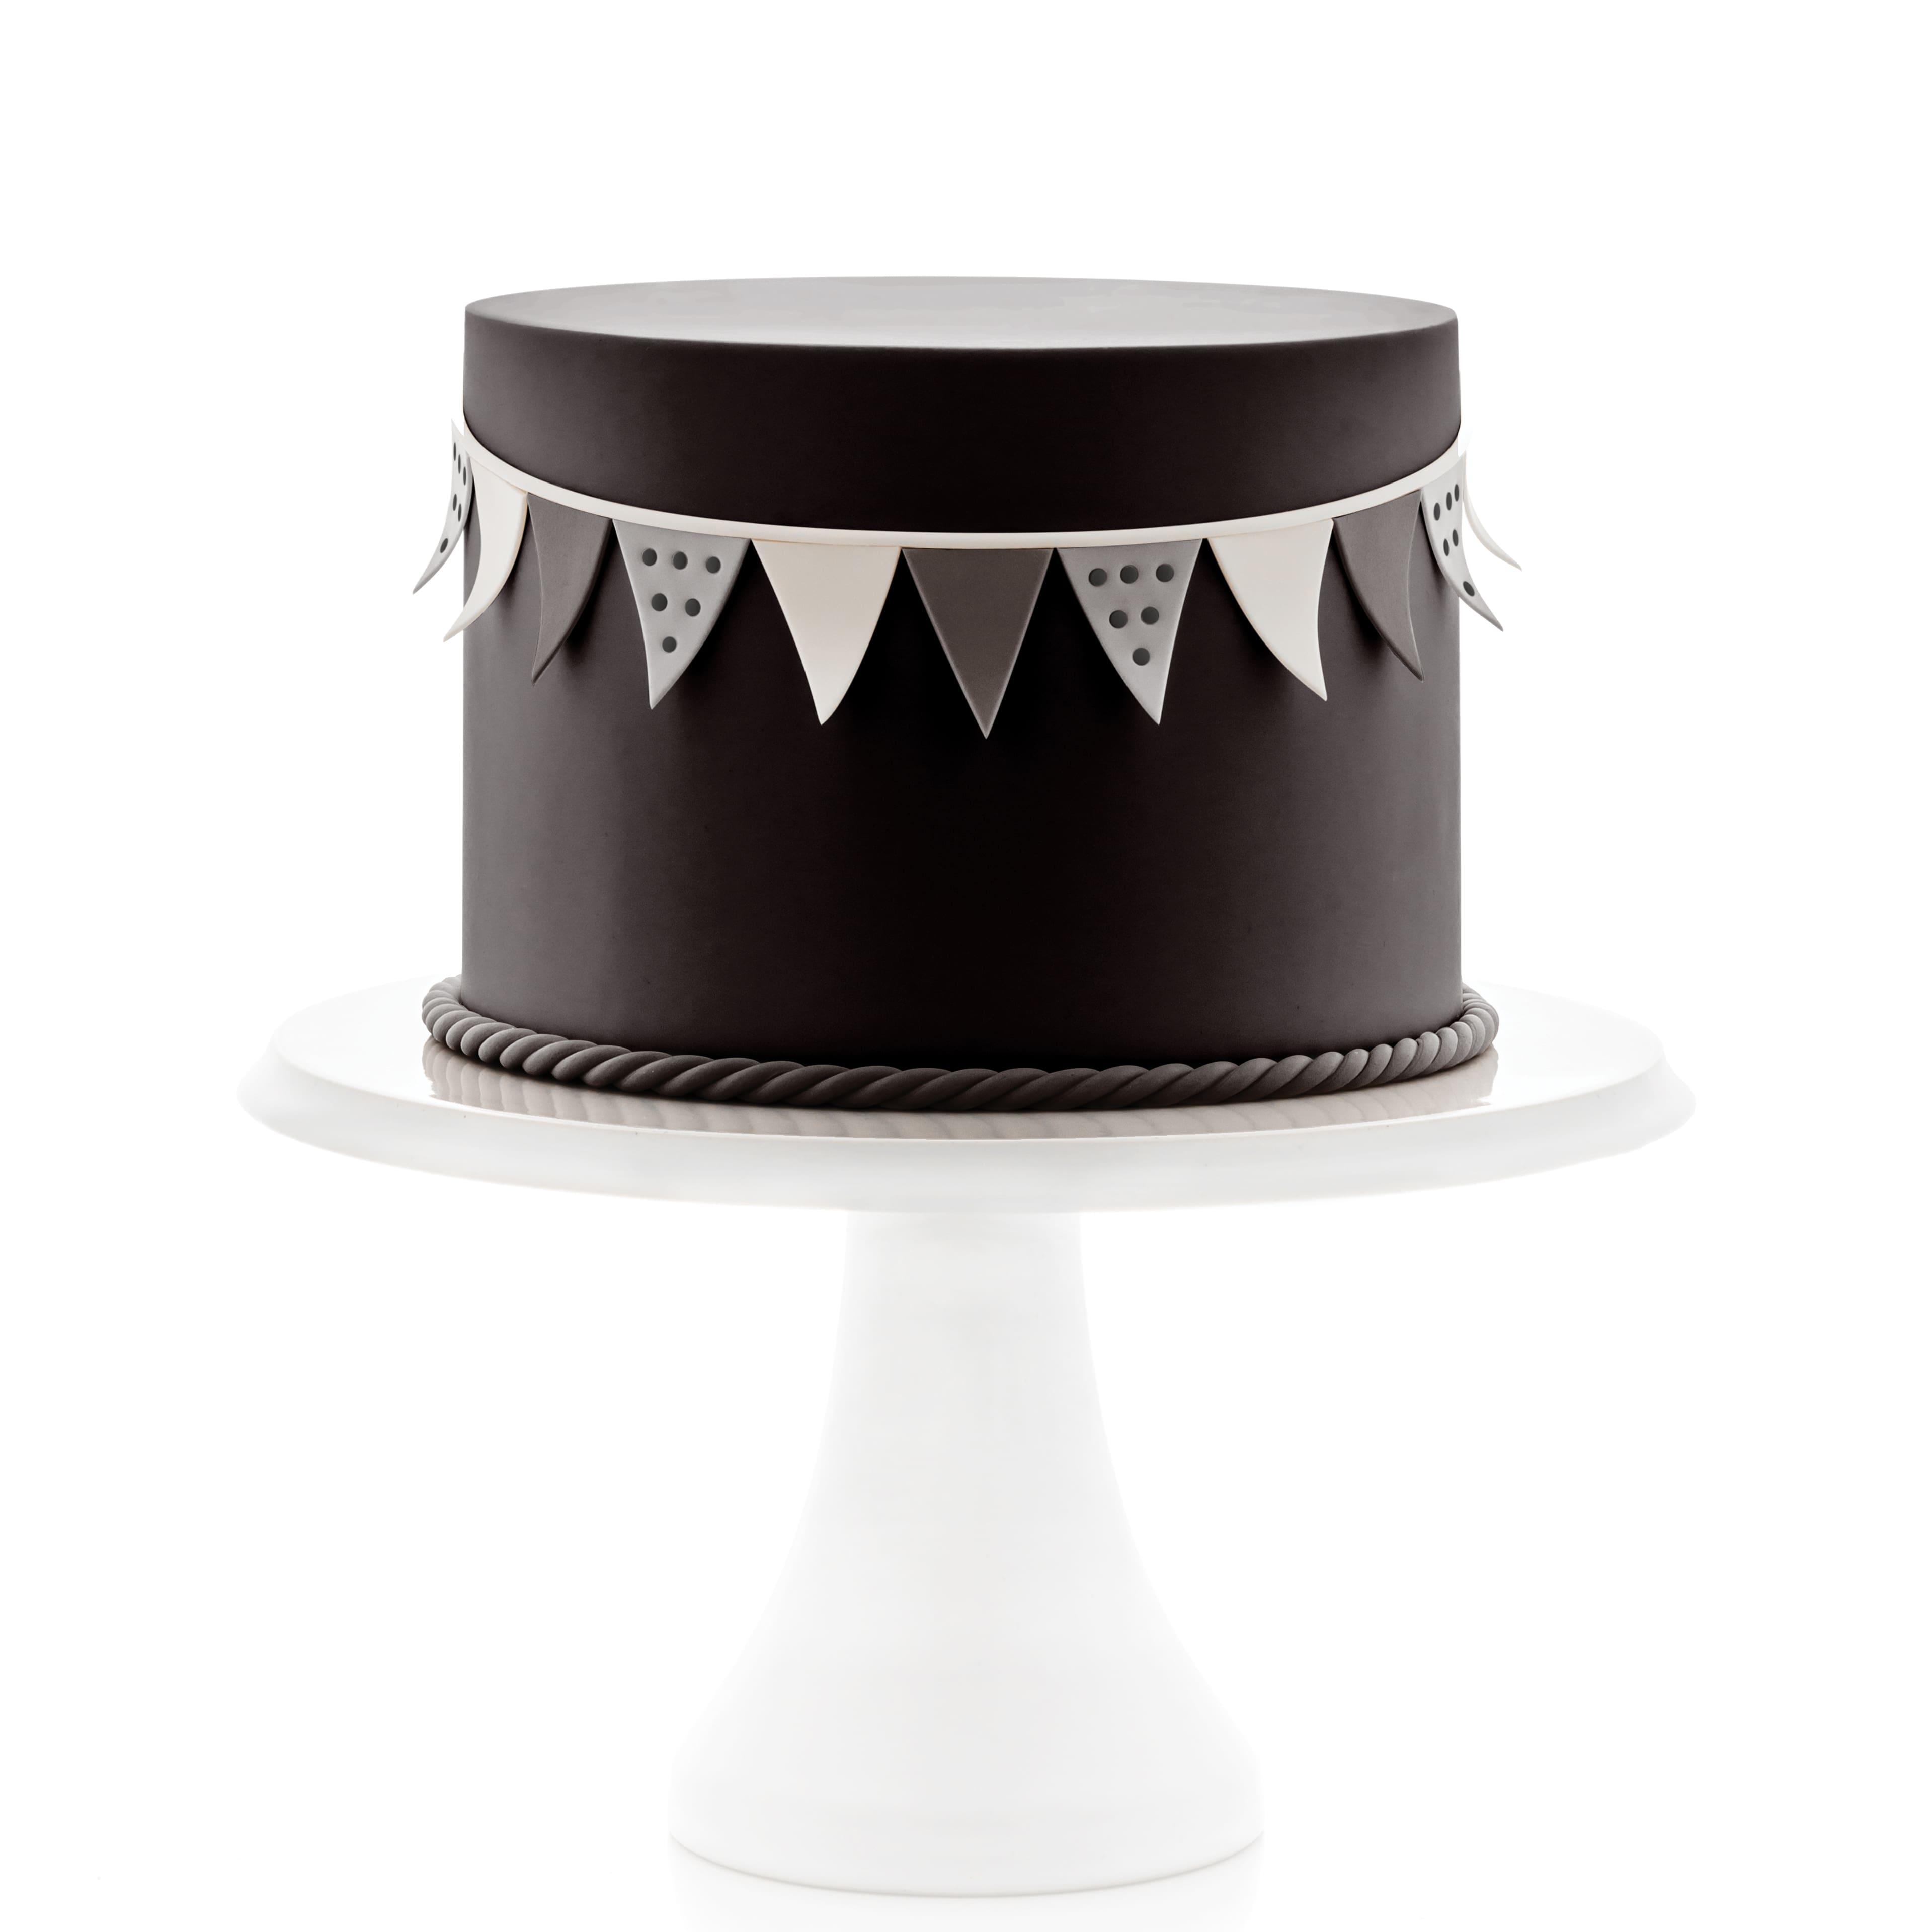 Turntable Cake Stand by Celebrate It™